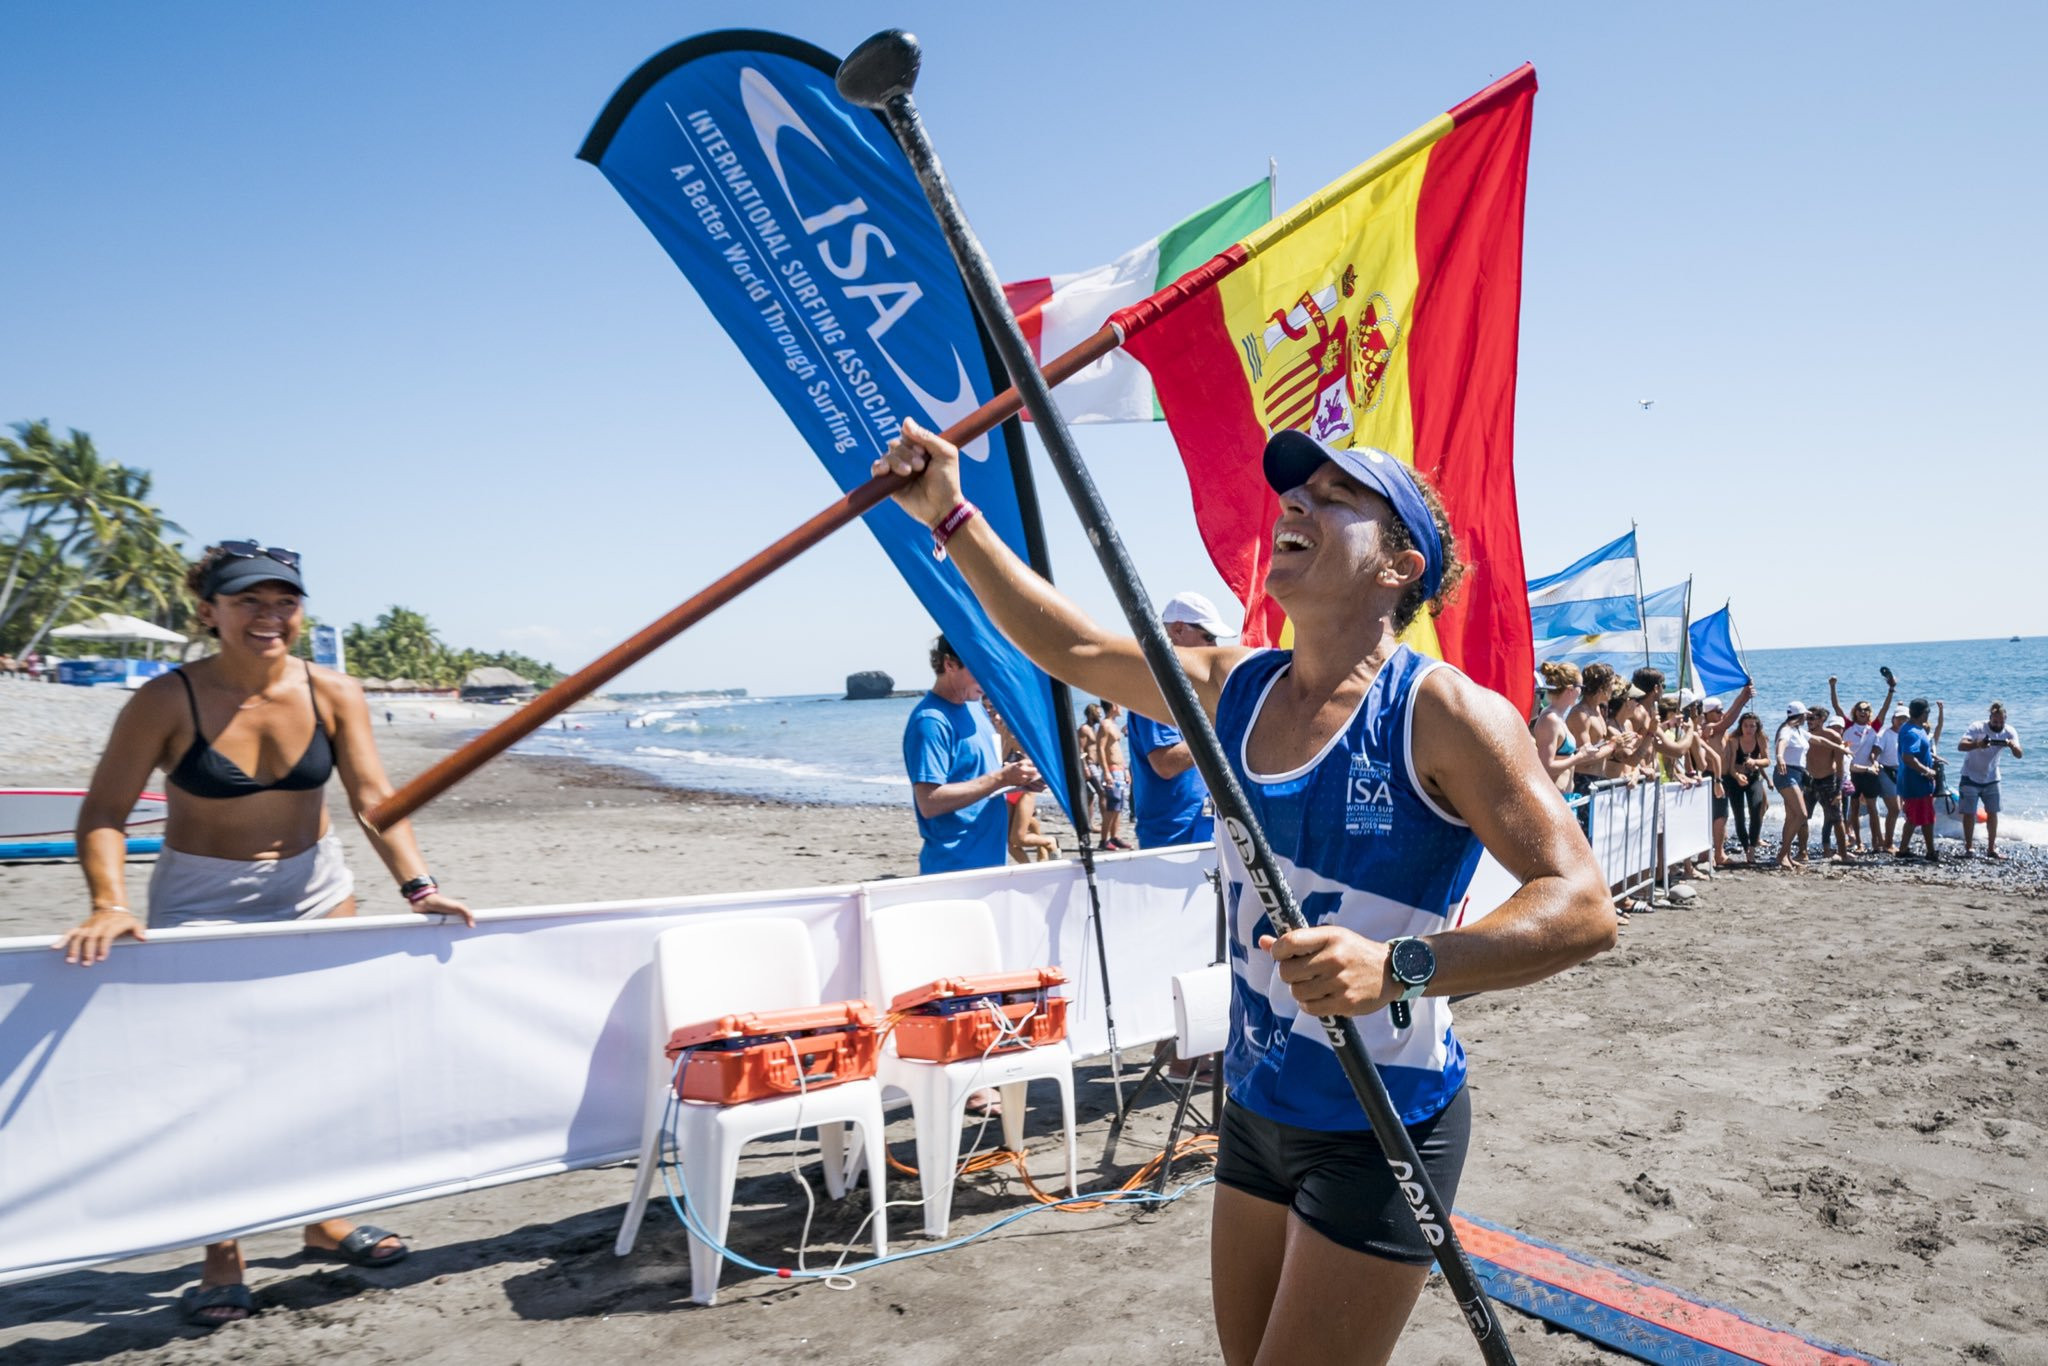 Esperanza Barreras of Spain claimed her second gold in El Sunzal on day four ©ISA 